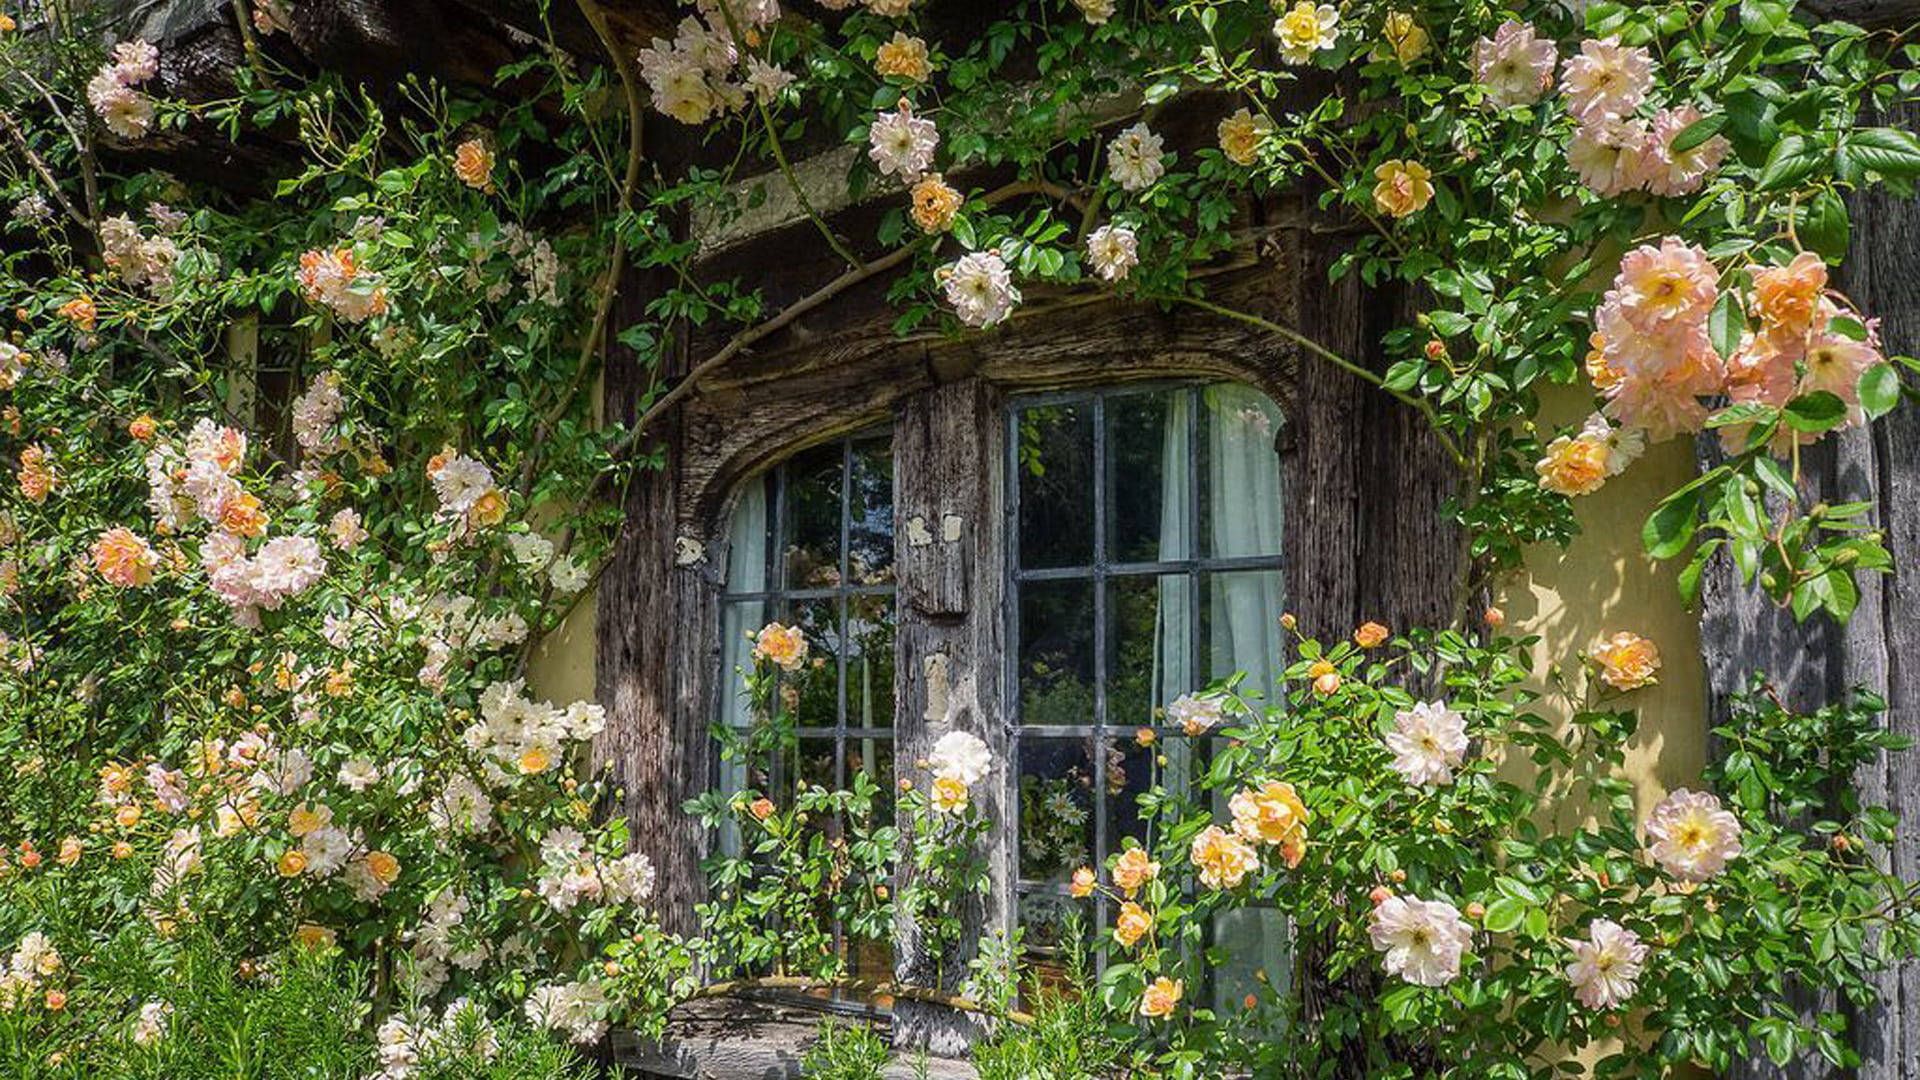 The roses are blooming in front of a window - Cottagecore